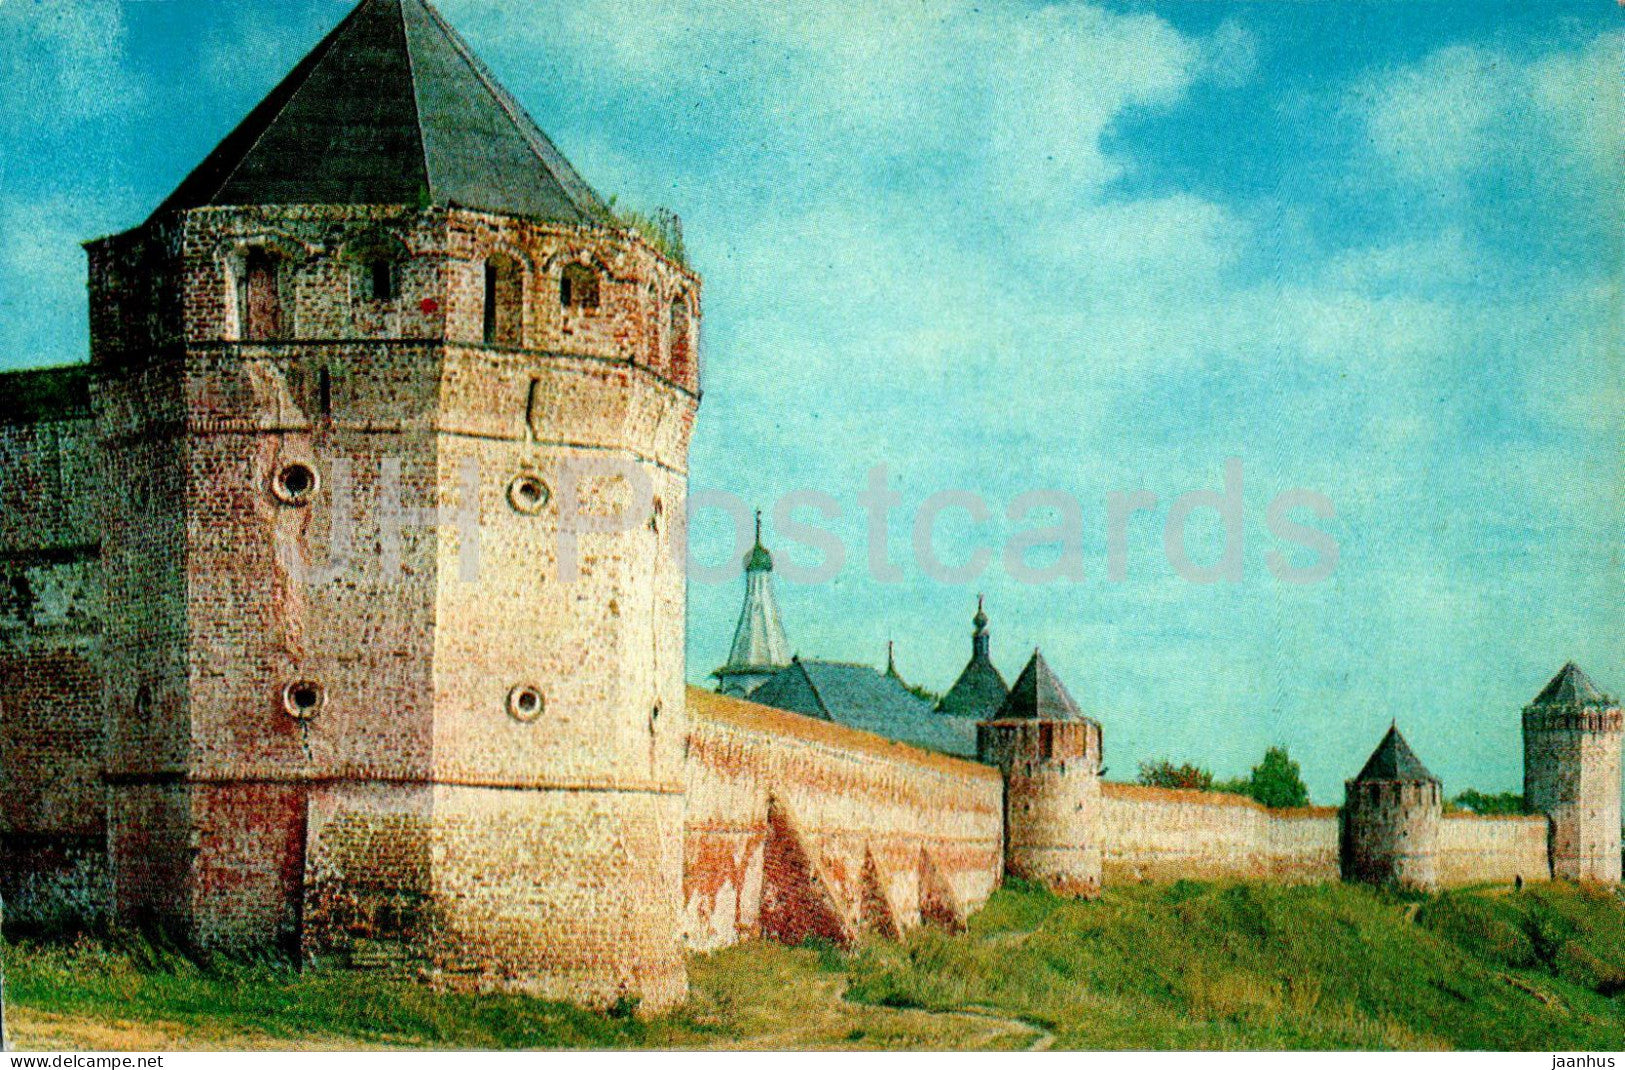 Suzdal - Fortifications of the Saviour St Euphimi Monastery - 1979 - Russia USSR - unused - JH Postcards